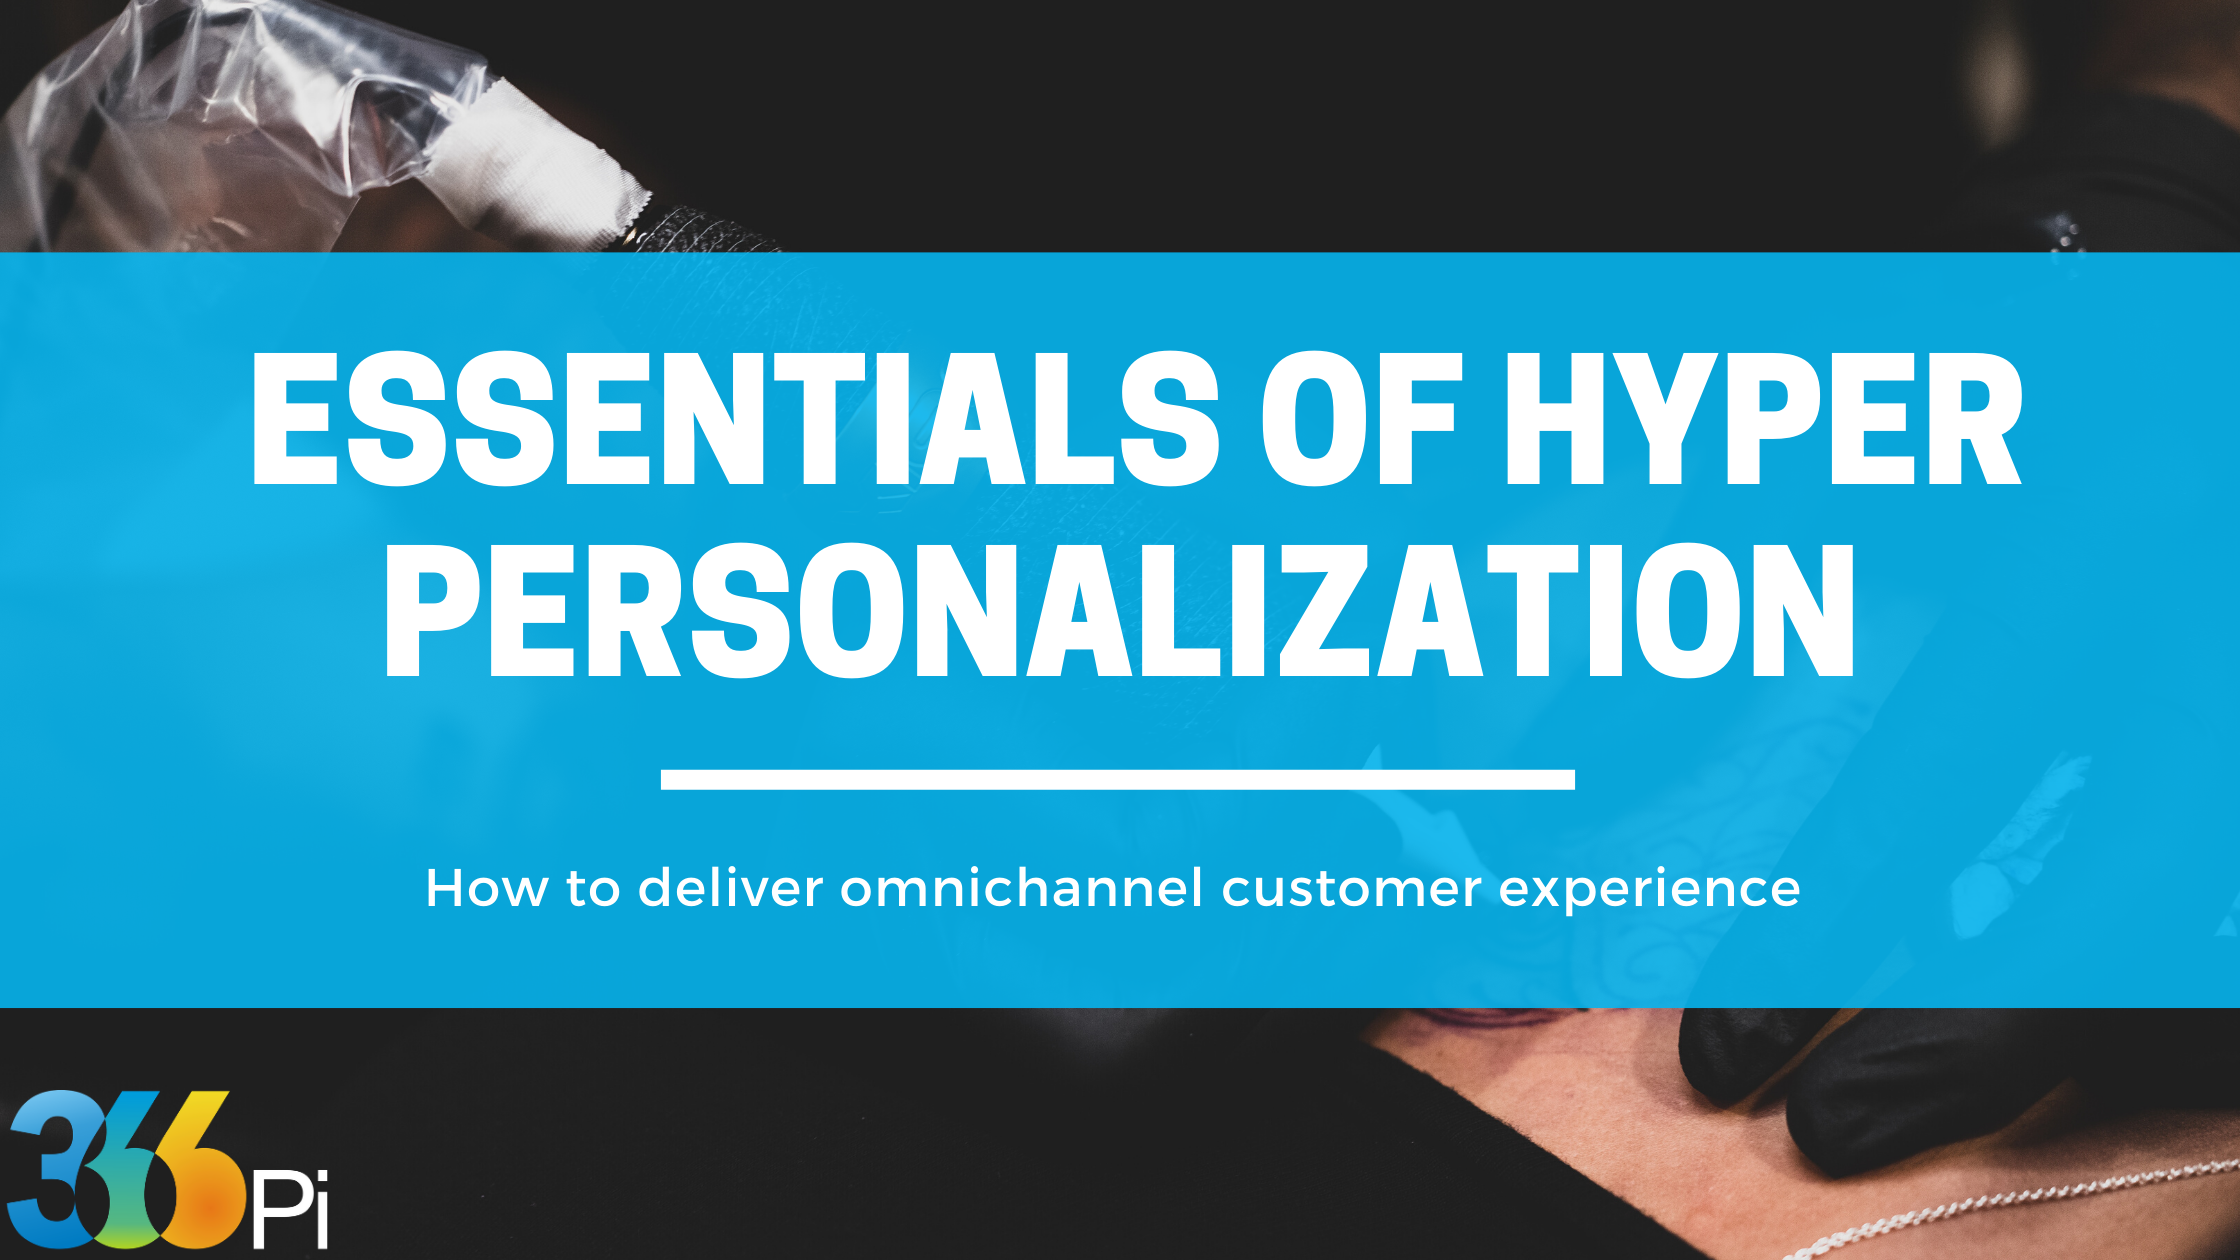 Hyper personalization for customer experience